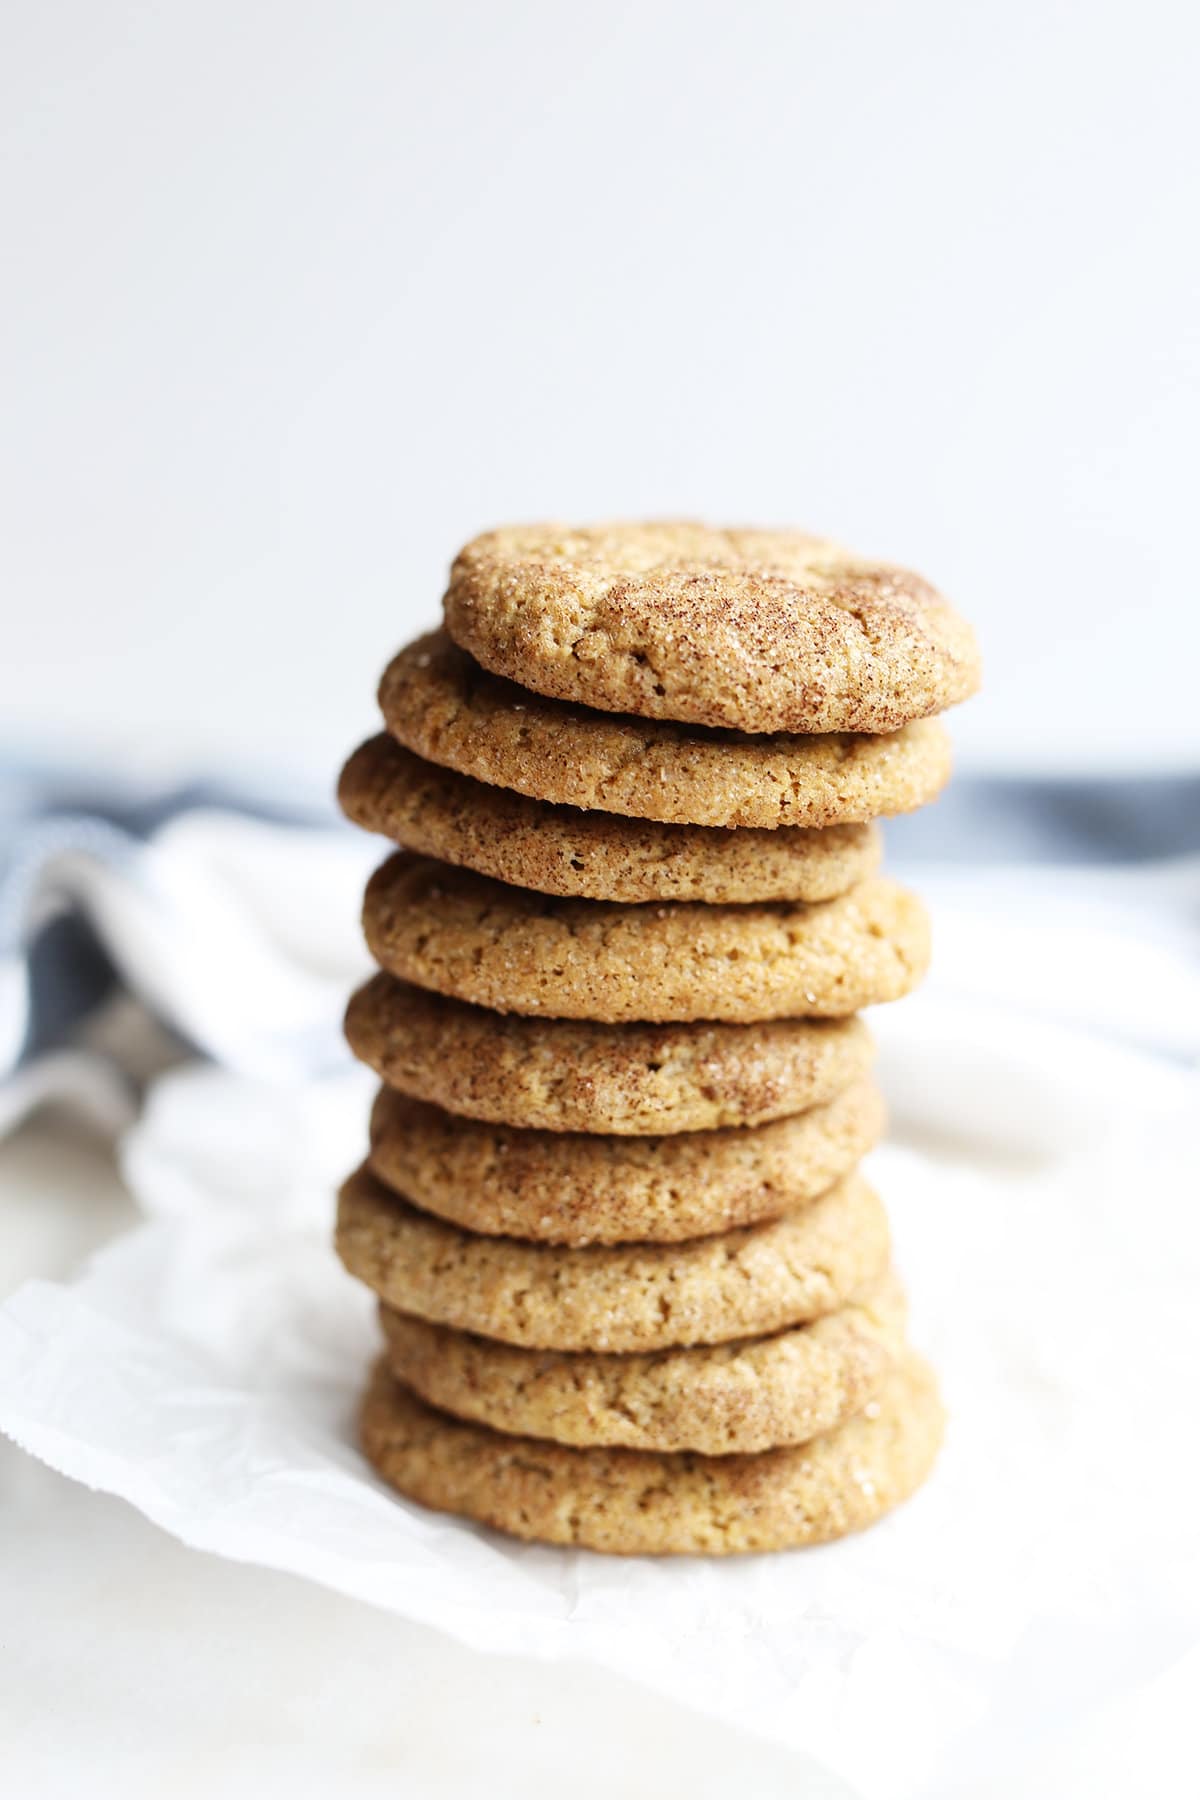 These homemade vegan Snickerdoodle Cookies are the best and super easy to make! Sweet, sugar and cinnamon form this chewy cookie. 